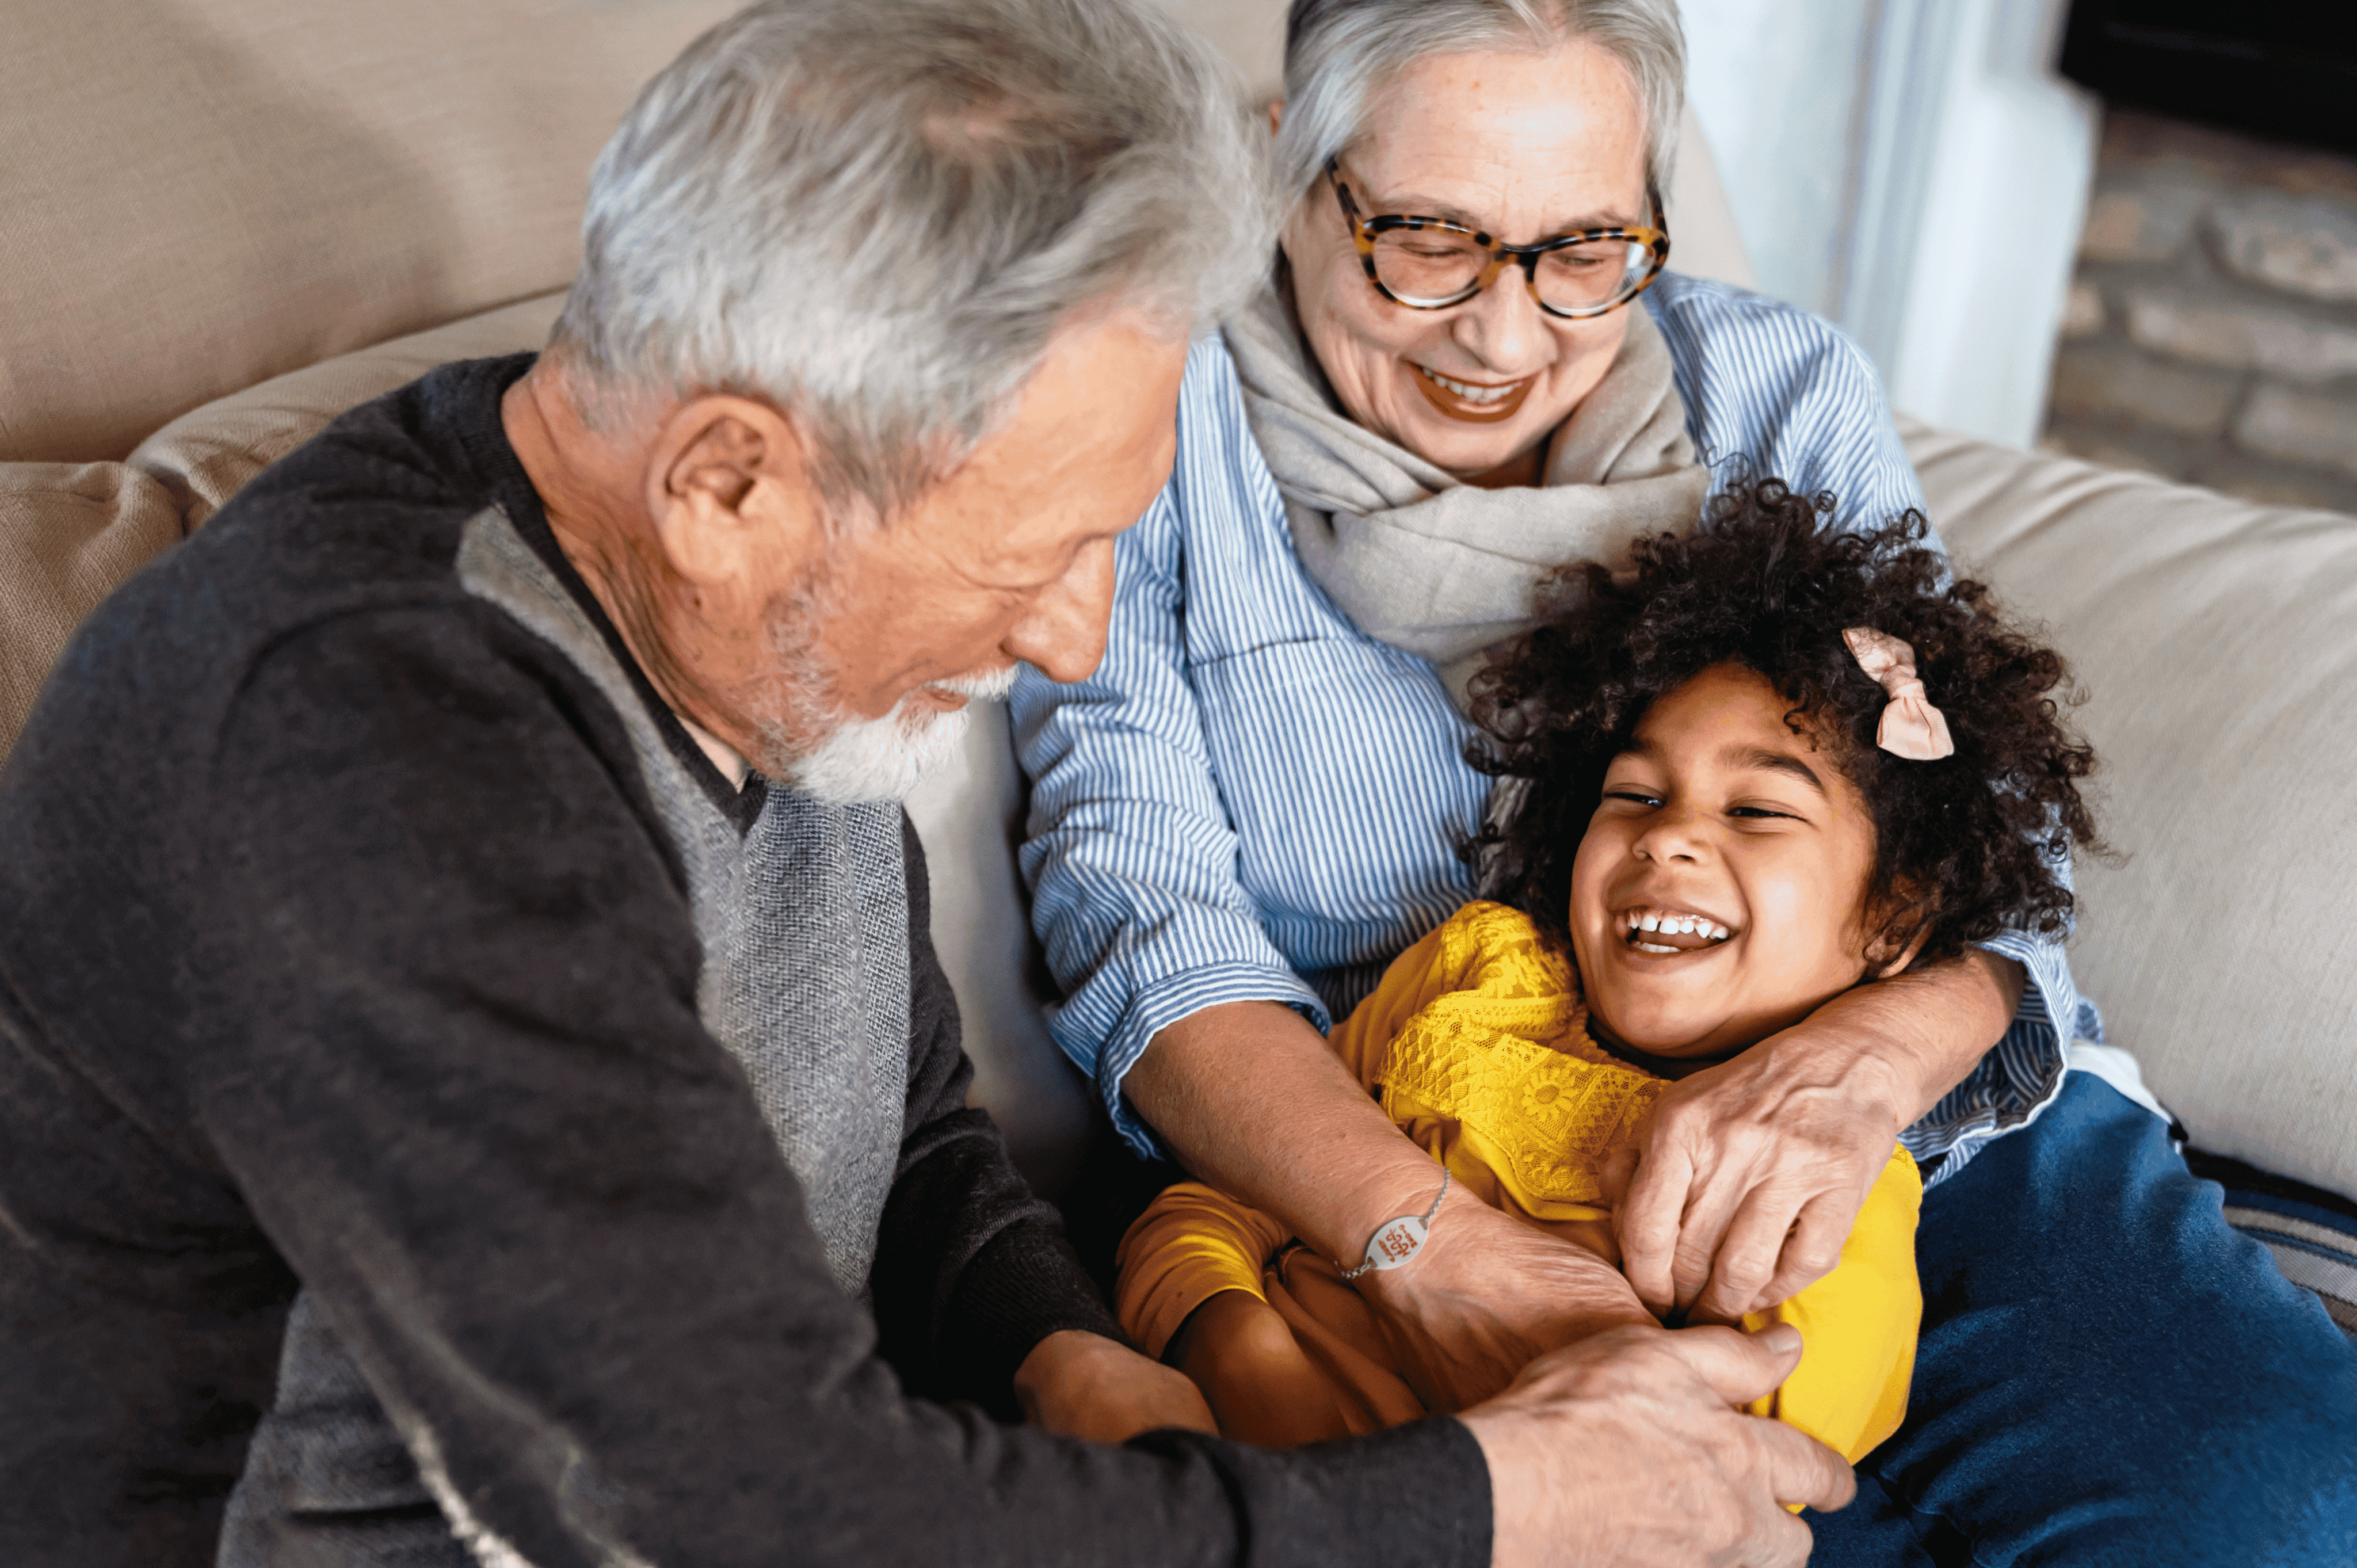 Grandfather and grandmother wearing her medical ID bracelet playing with their granddaughter